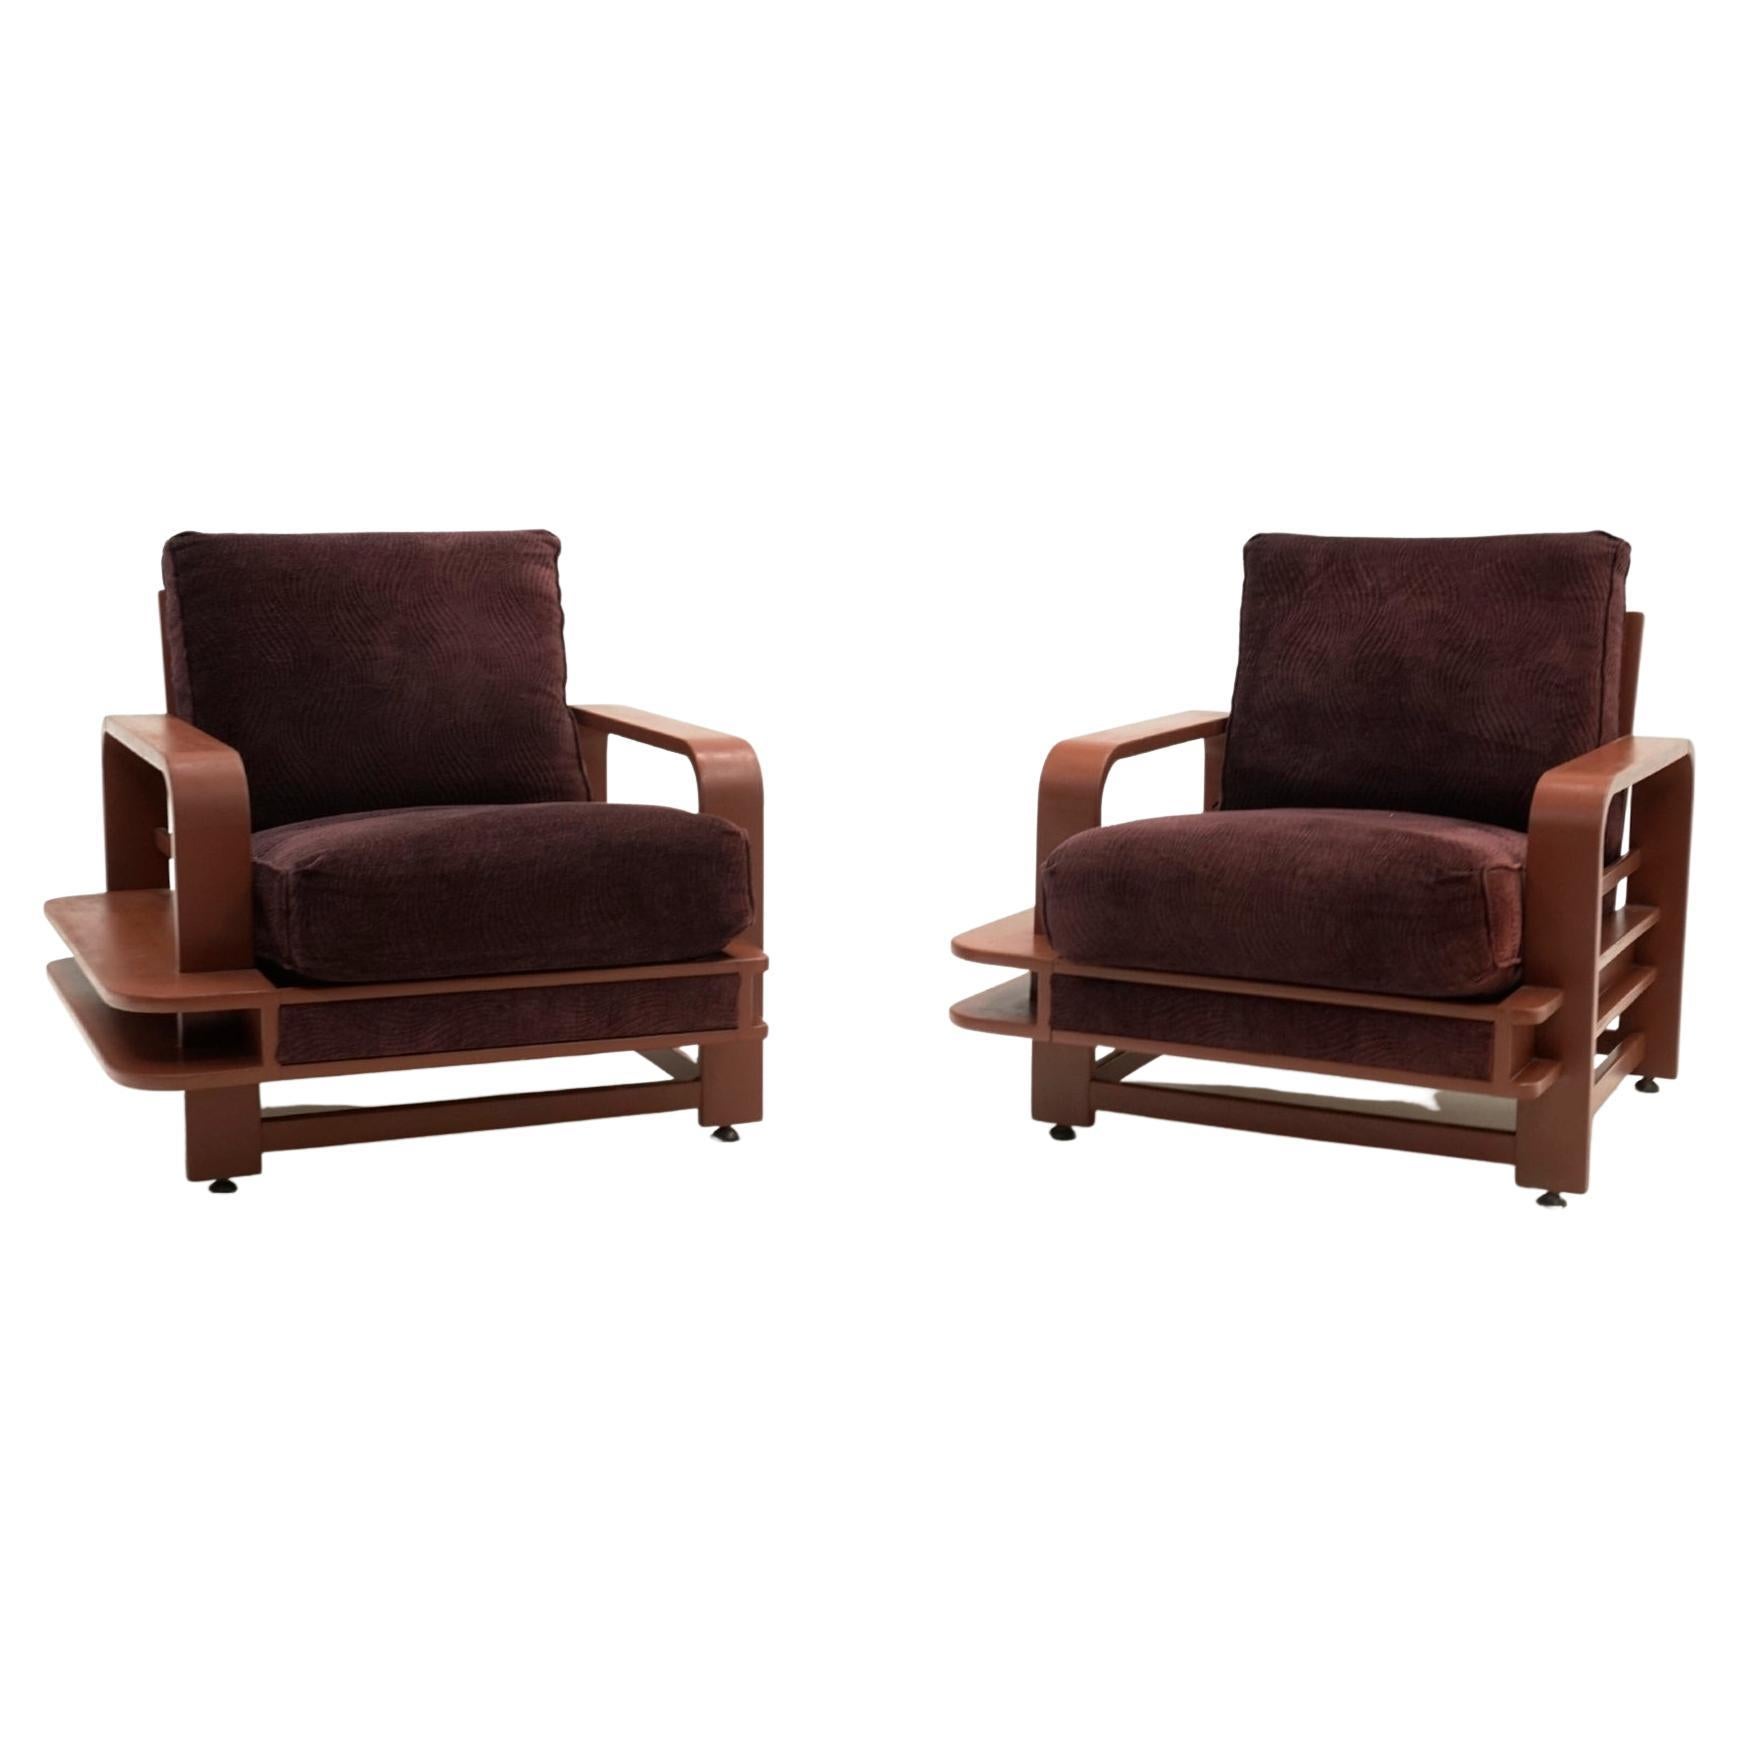 Rare Pair Russel Wright Lounge Chairs for Conant Ball, 1935